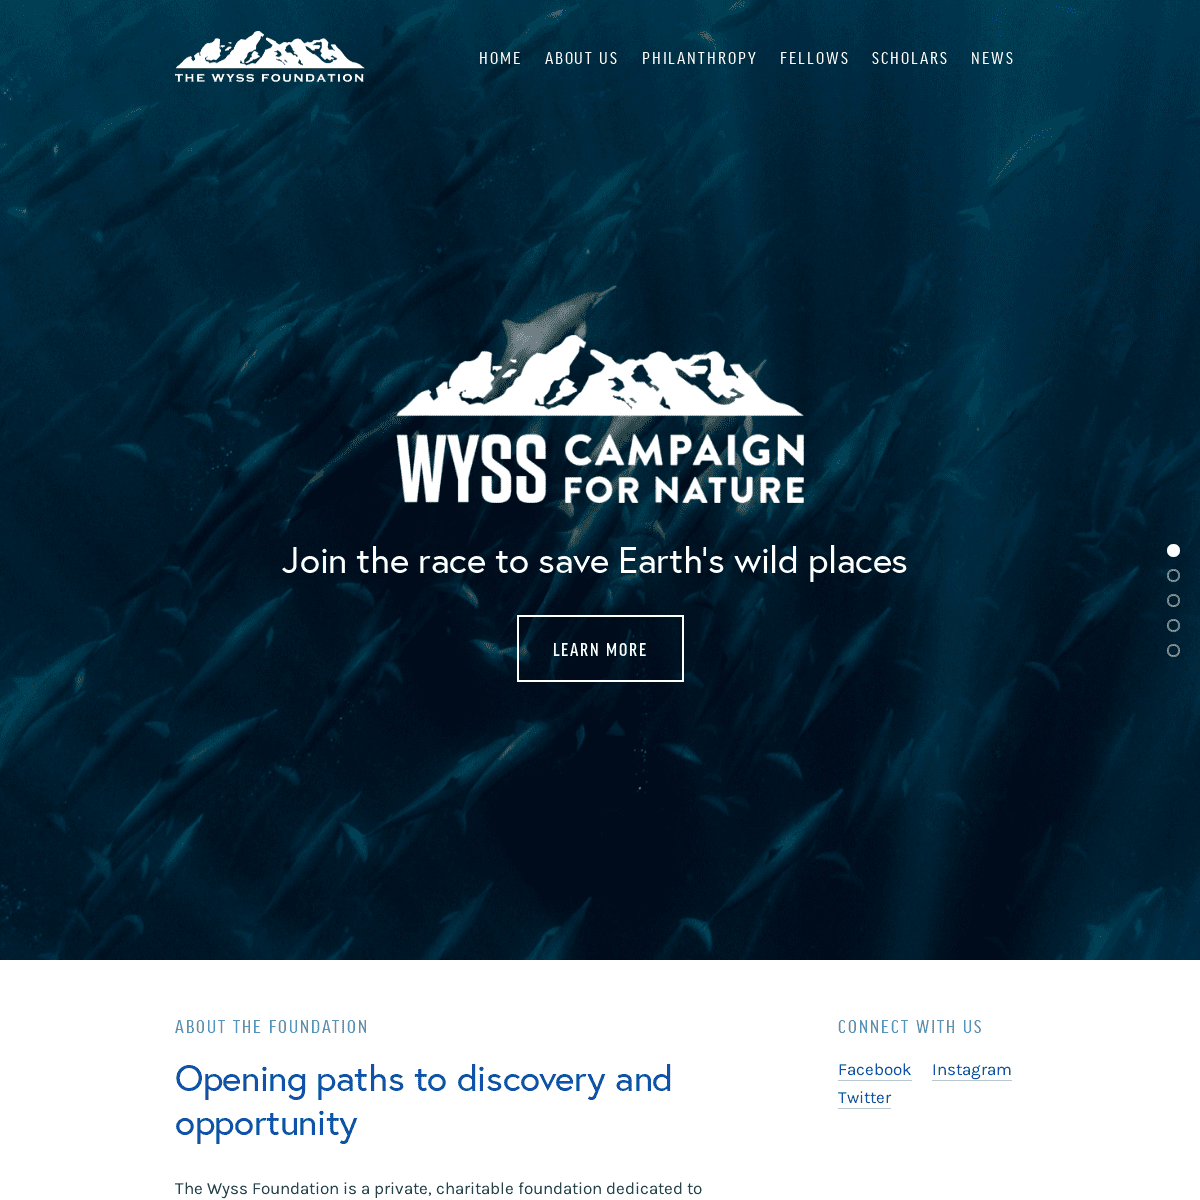 A complete backup of https://wyssfoundation.org